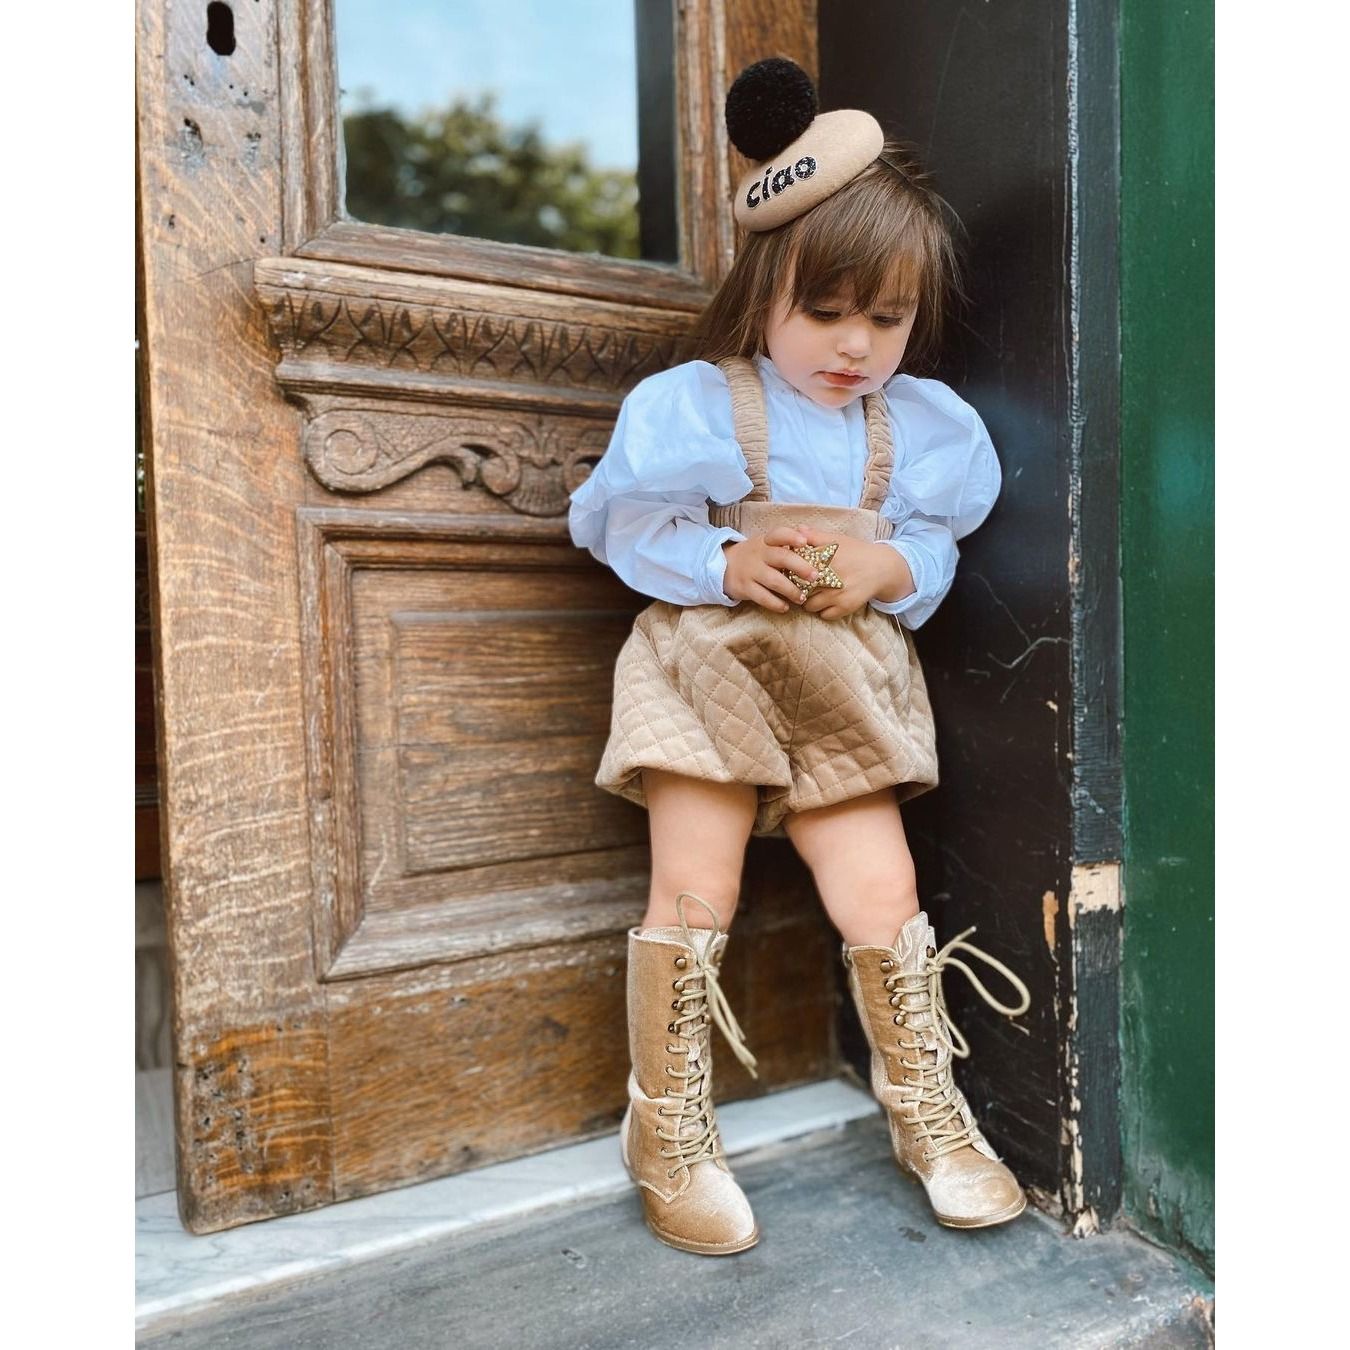 2021 autumn new children's clothing girl's long-sleeved knitted pit top + pressed strap shorts two-piece set